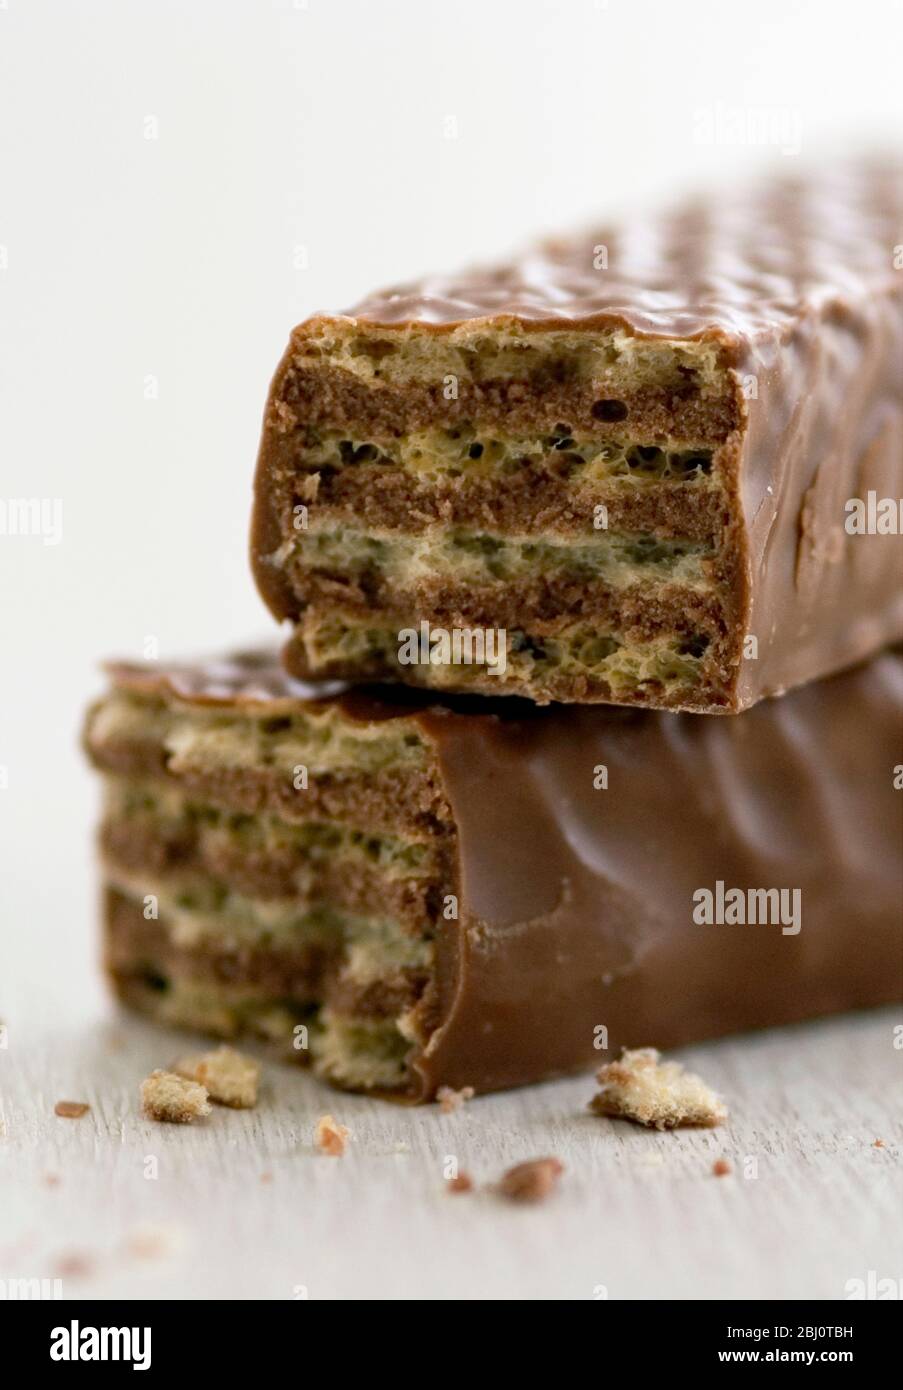 Chocolate wafer biscuit coated in chocolate, broken and stacked to show inside - Stock Photo